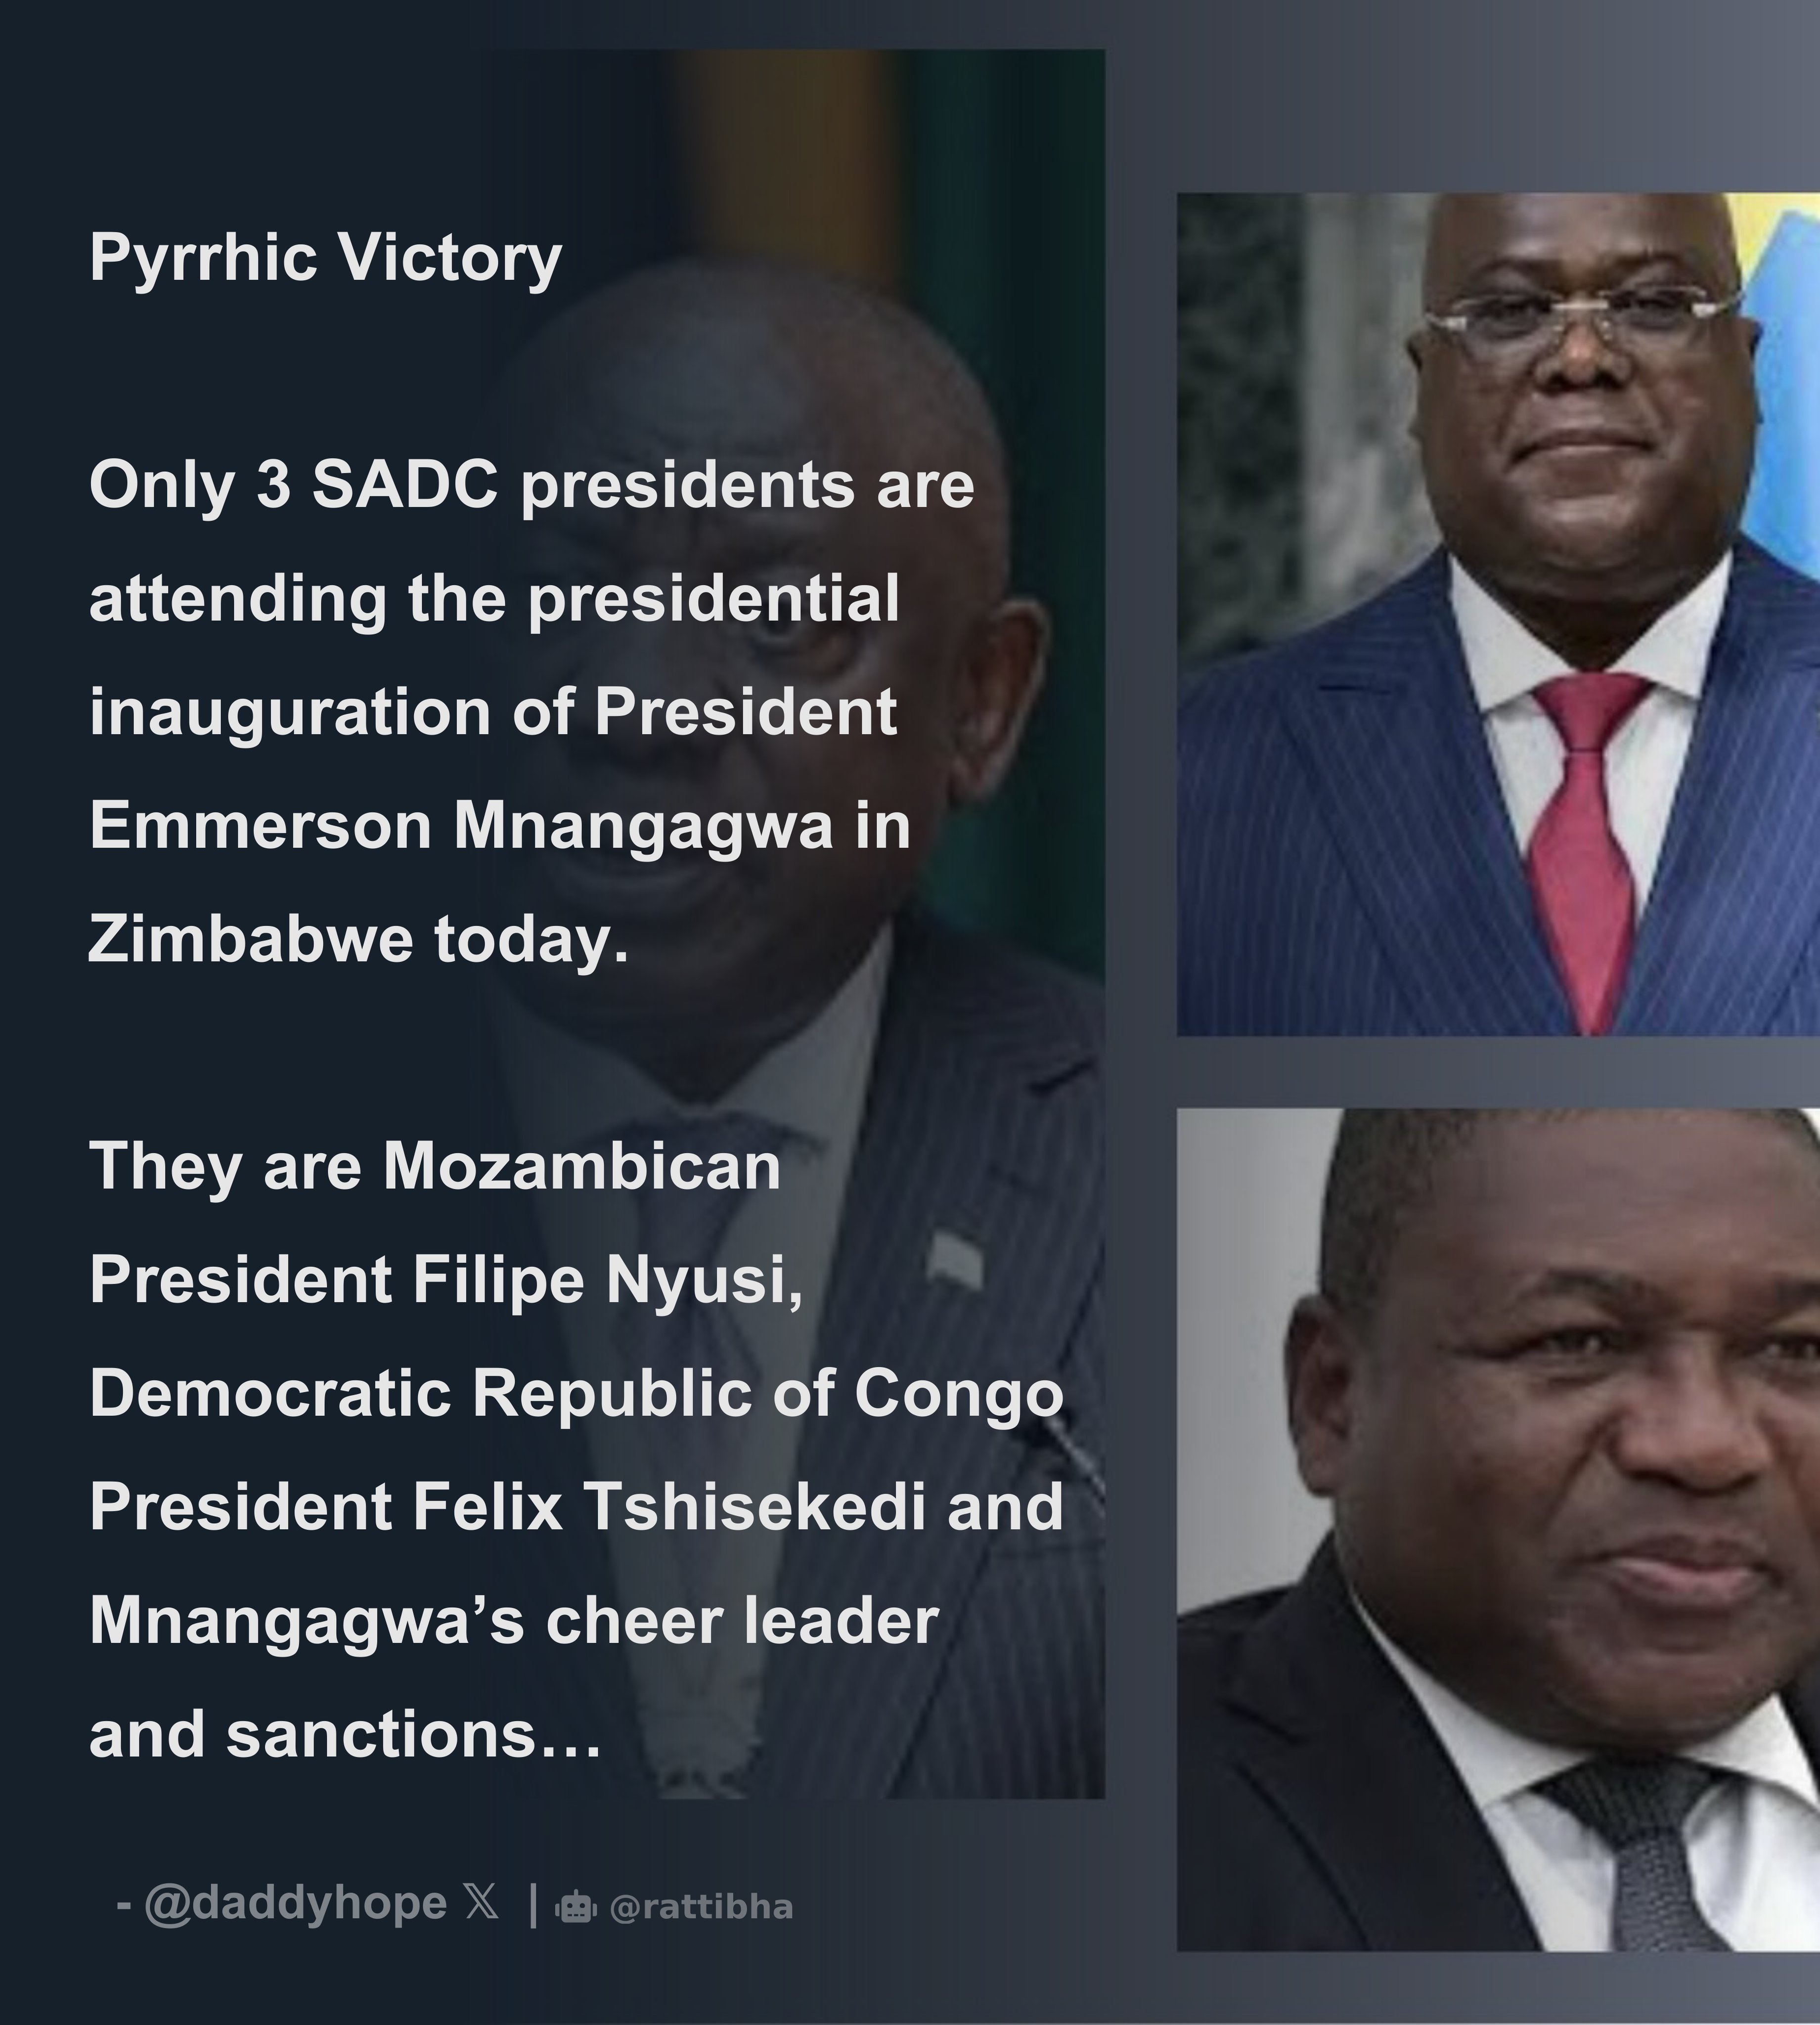 Only 3 SADC presidents attend Mnangagwa inauguration in Zim, ANC’s Fikile Mbalula’s “11 Heads of State” is a lie